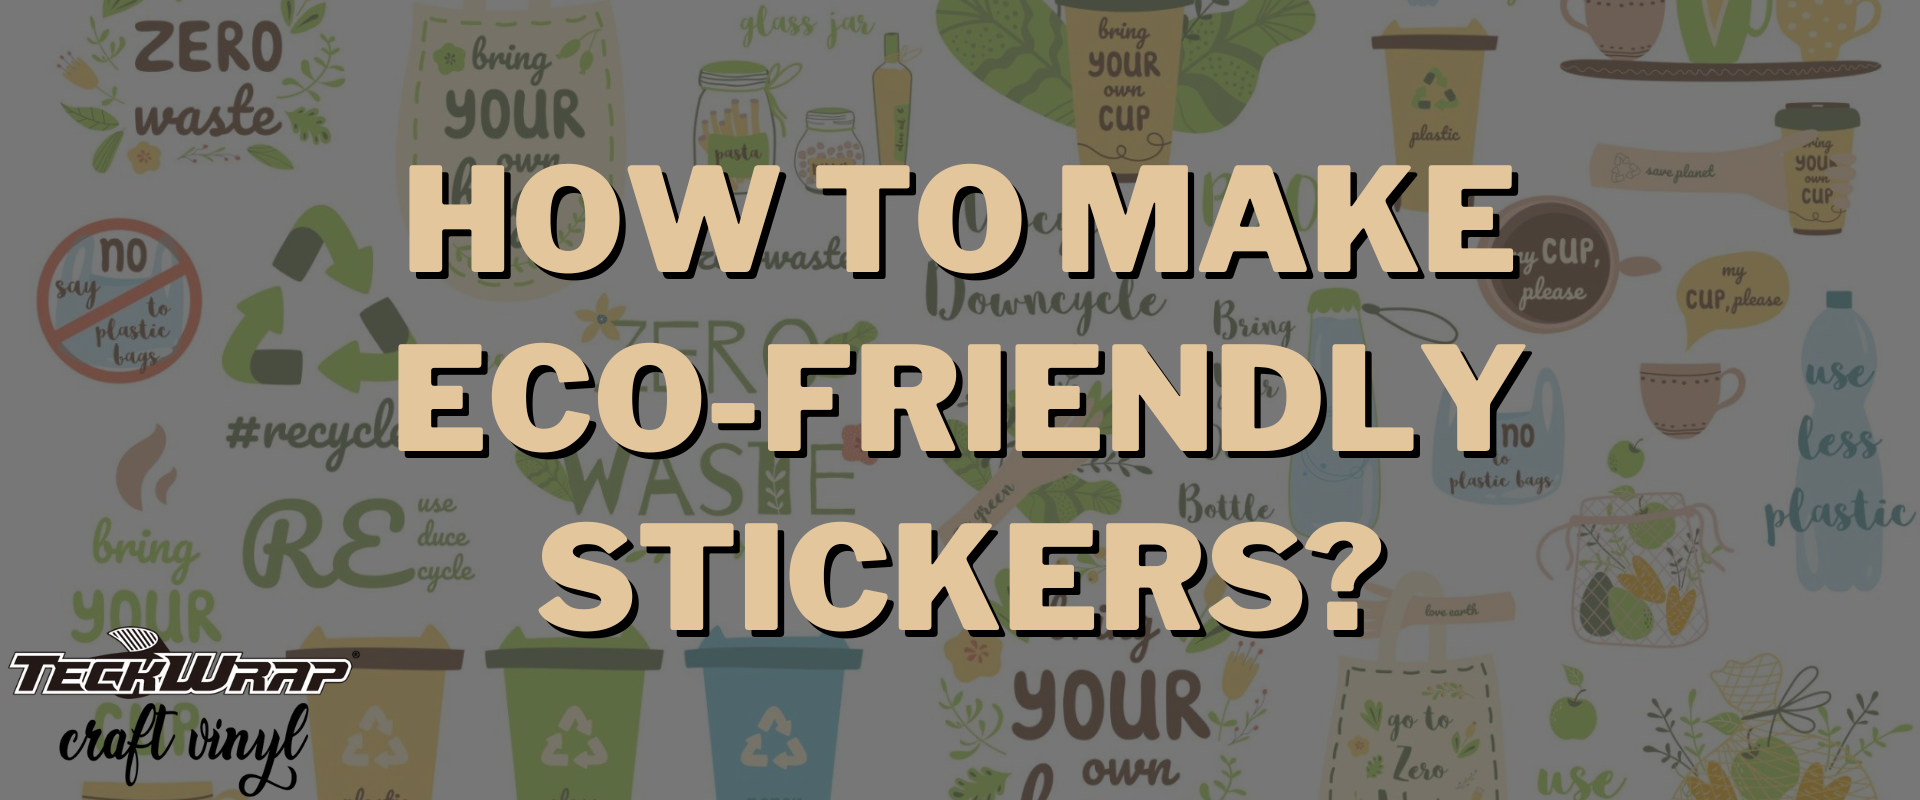 How to Make Waterproof Stickers with Teckwrap Laminate Film 